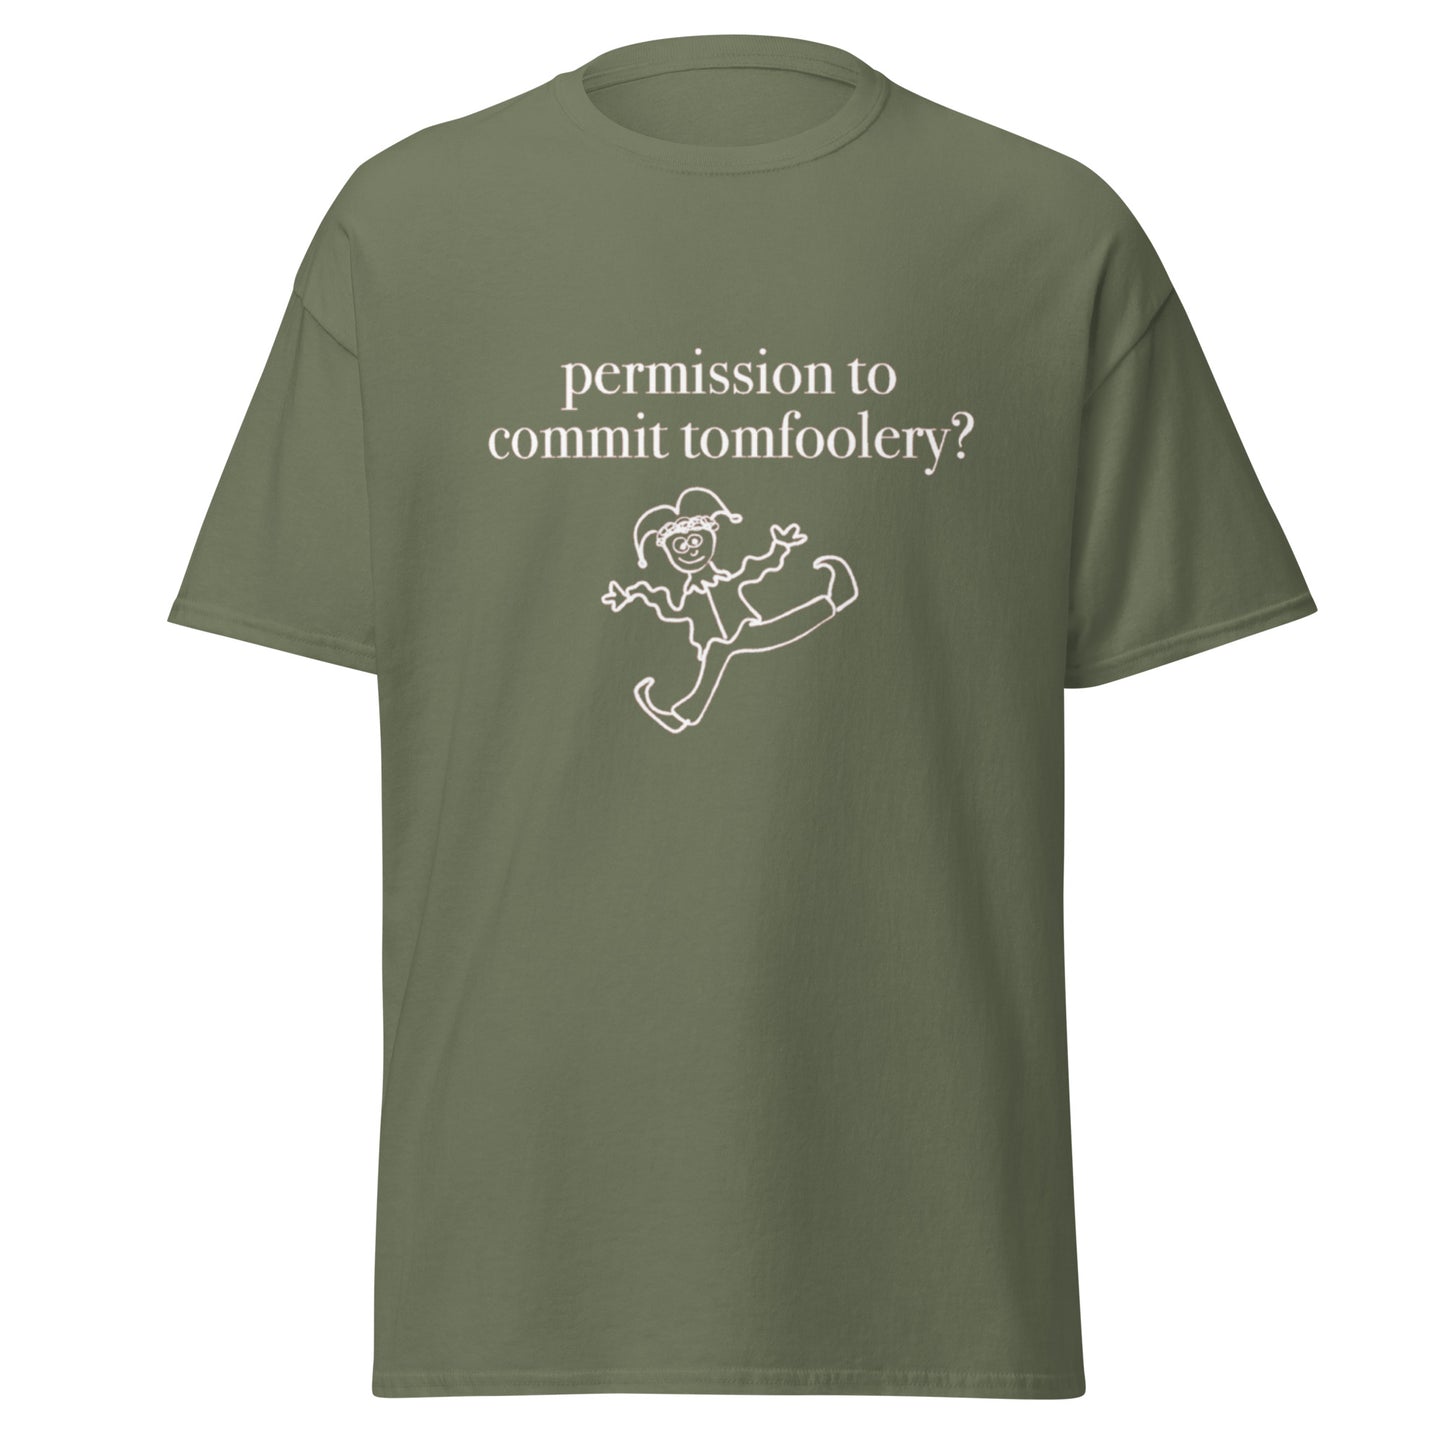 PERMISSION TO COMMIT TOMFOOLERY TEE